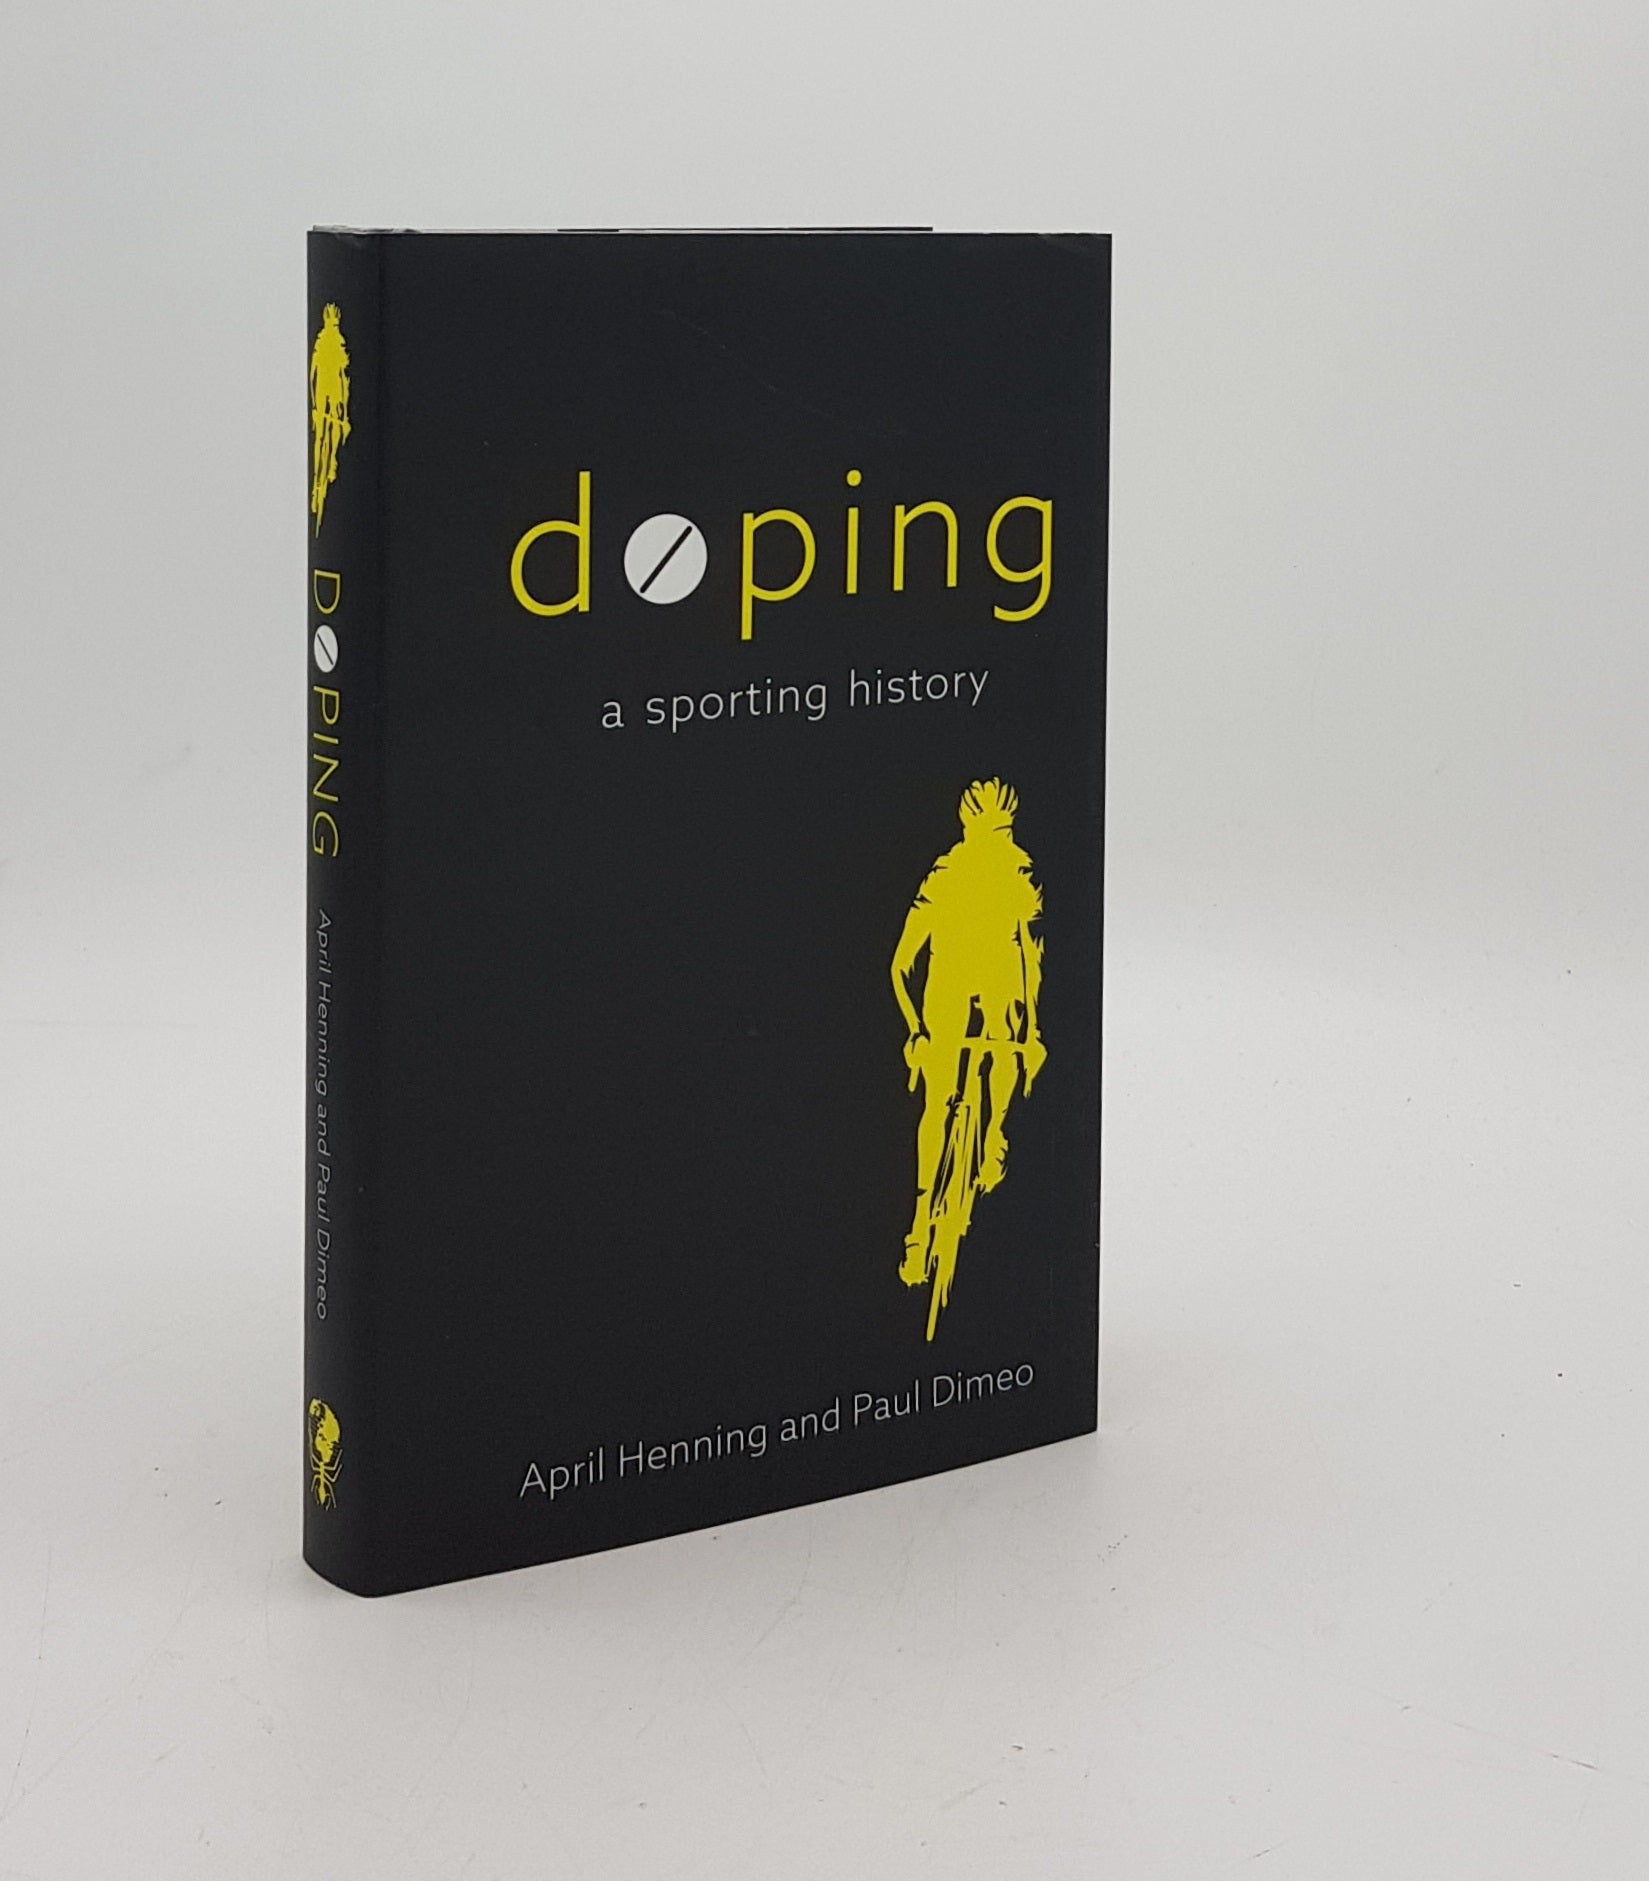 HENNING April, DIMEO Paul - Doping a Sporting History